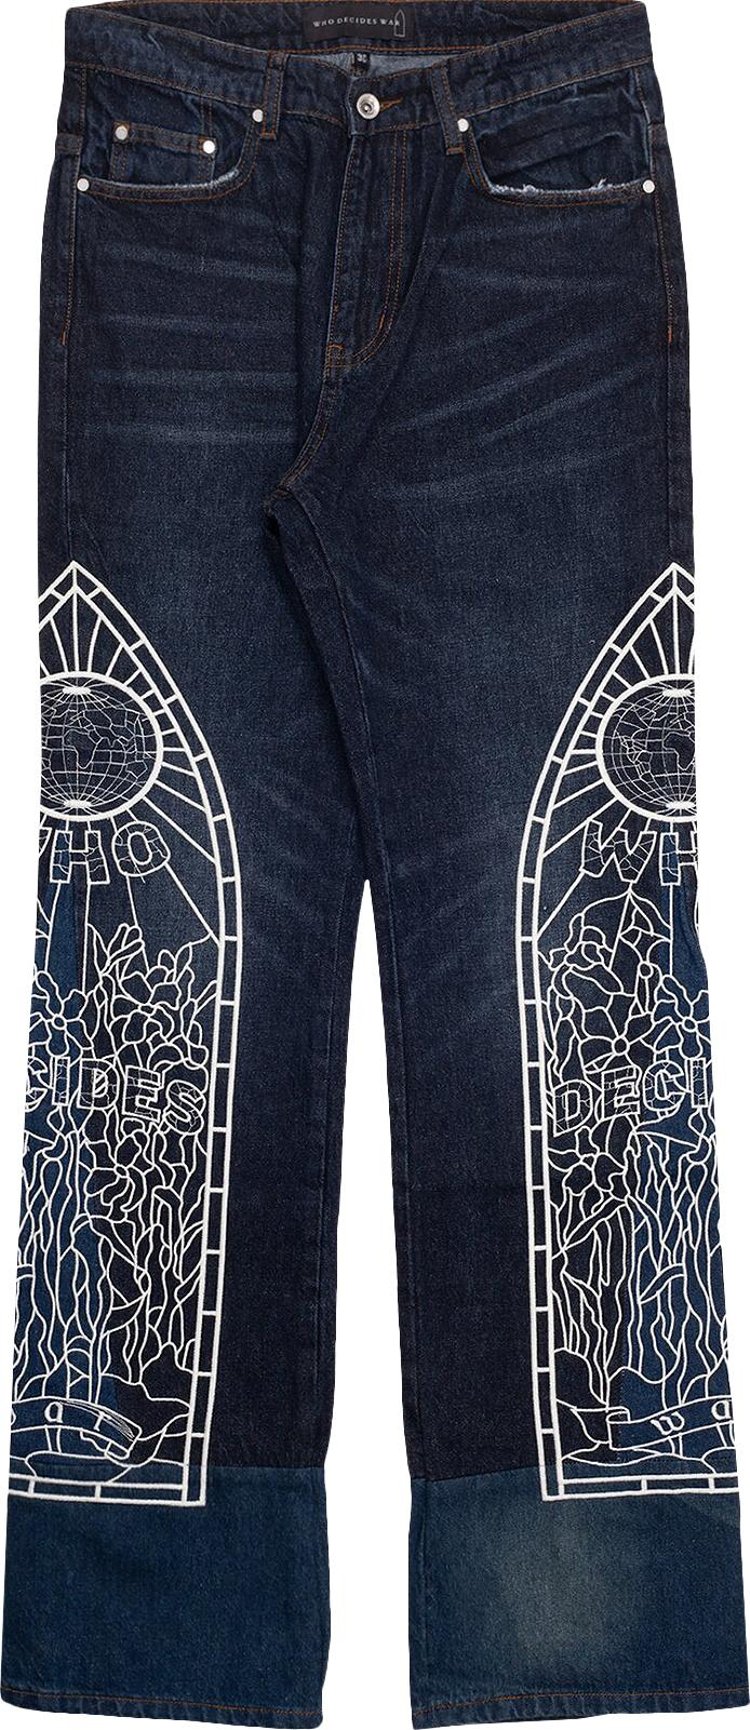 Who Decides War All Over Embroidery Jeans 'Indigo'